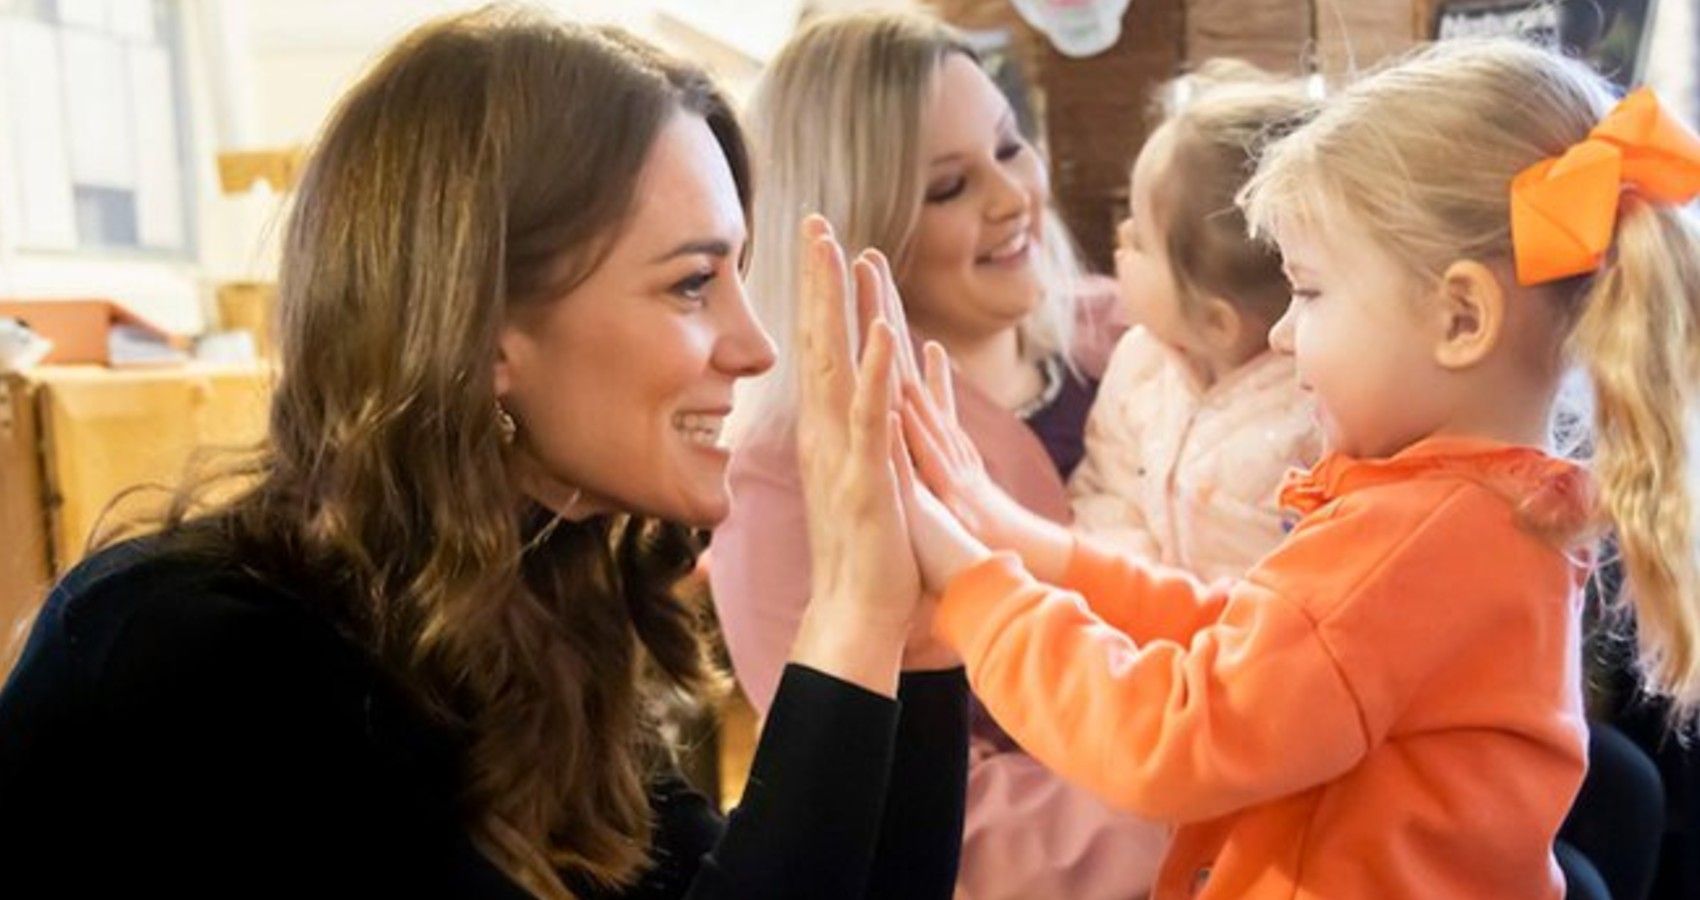 Kate Middleton's Announcement For Her 'Passion Project' Aimed At Young Families